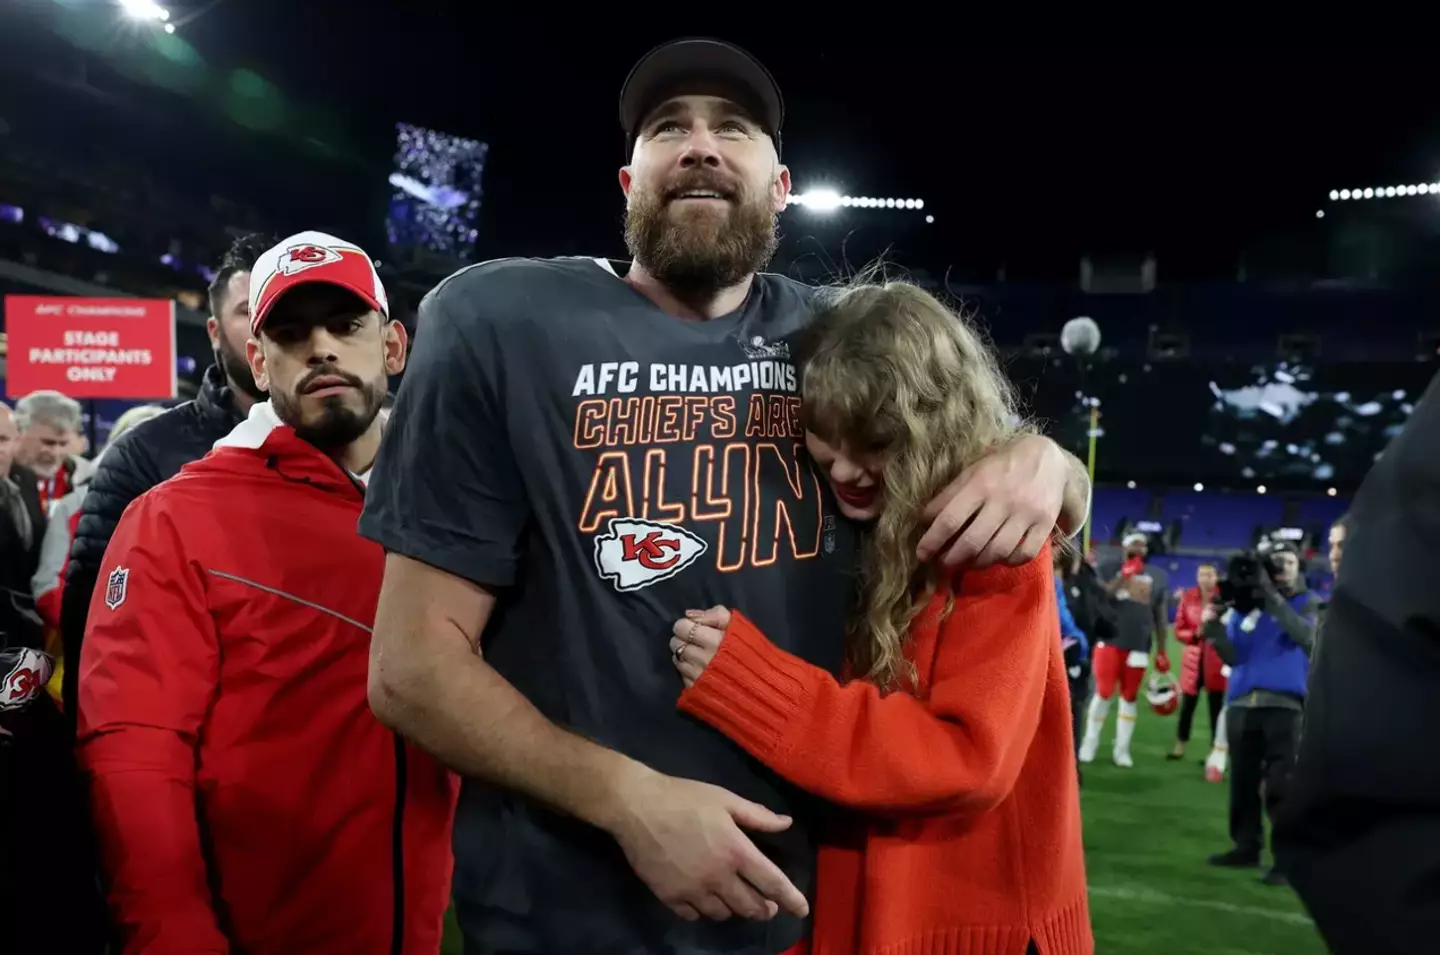 Swift and Kelce have been dating since last year.